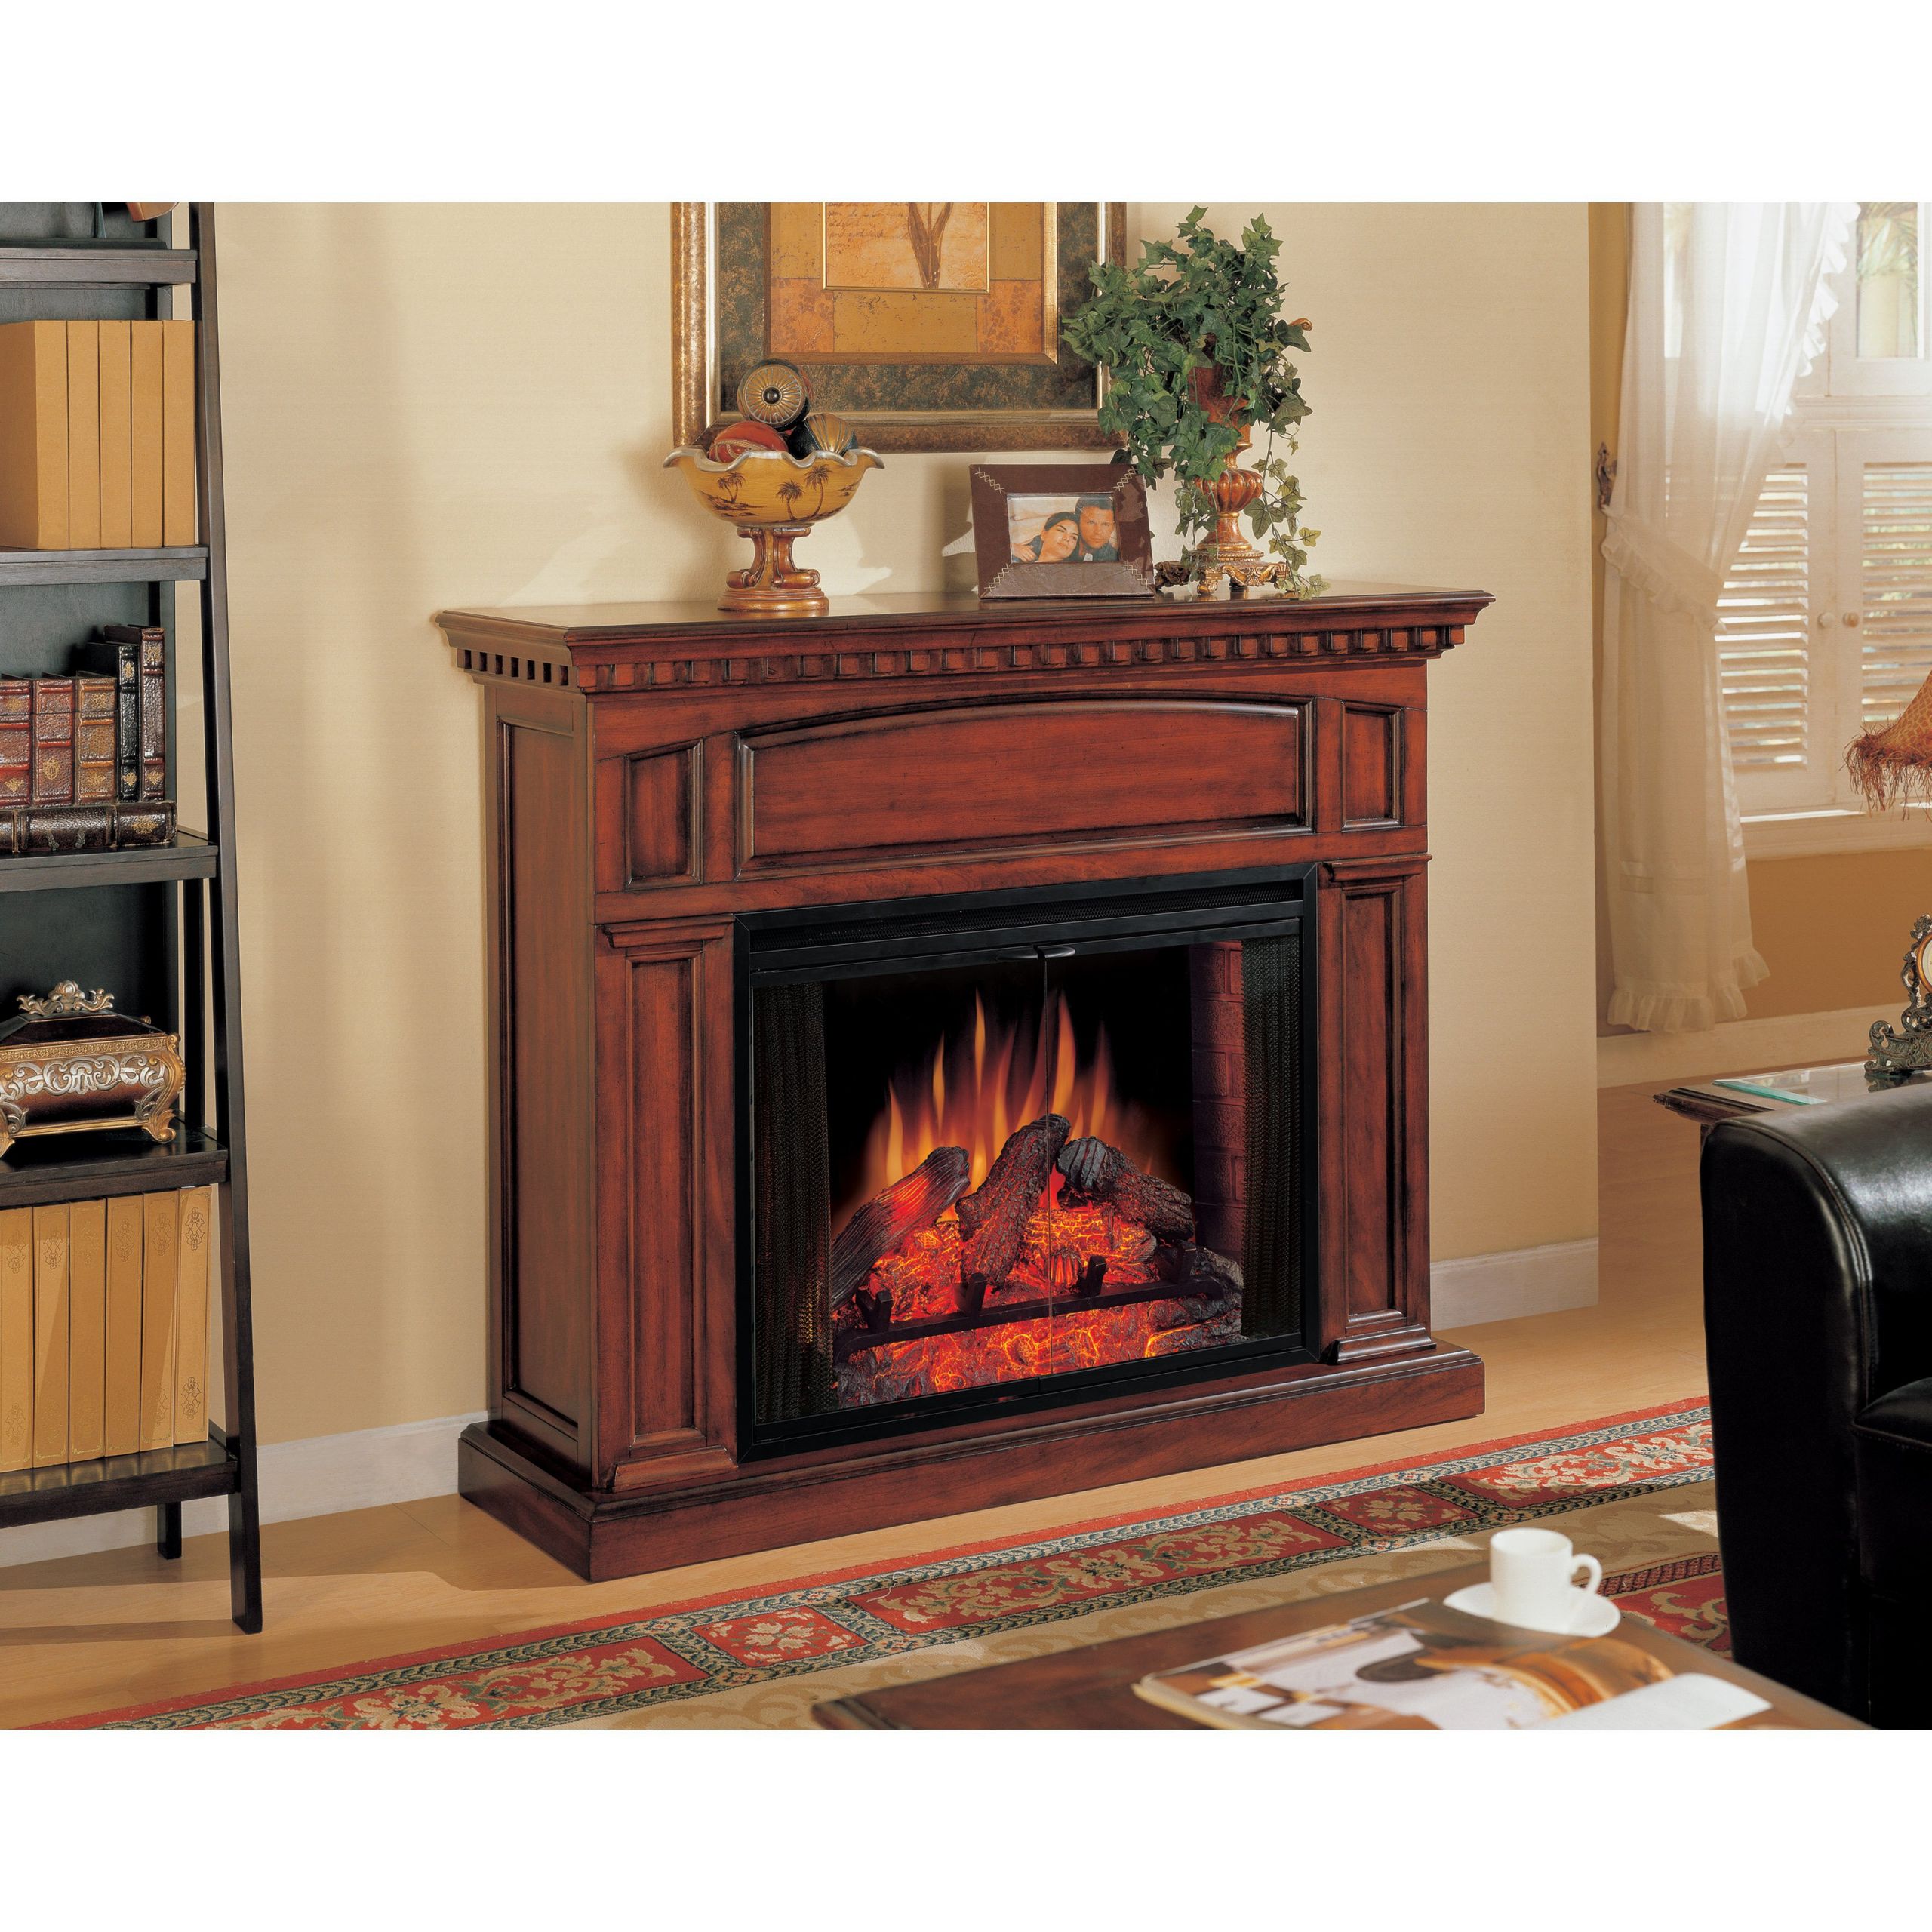 Cherry Electric Fireplace
 Classic Flame Geor own Cherry Electric Fireplace at